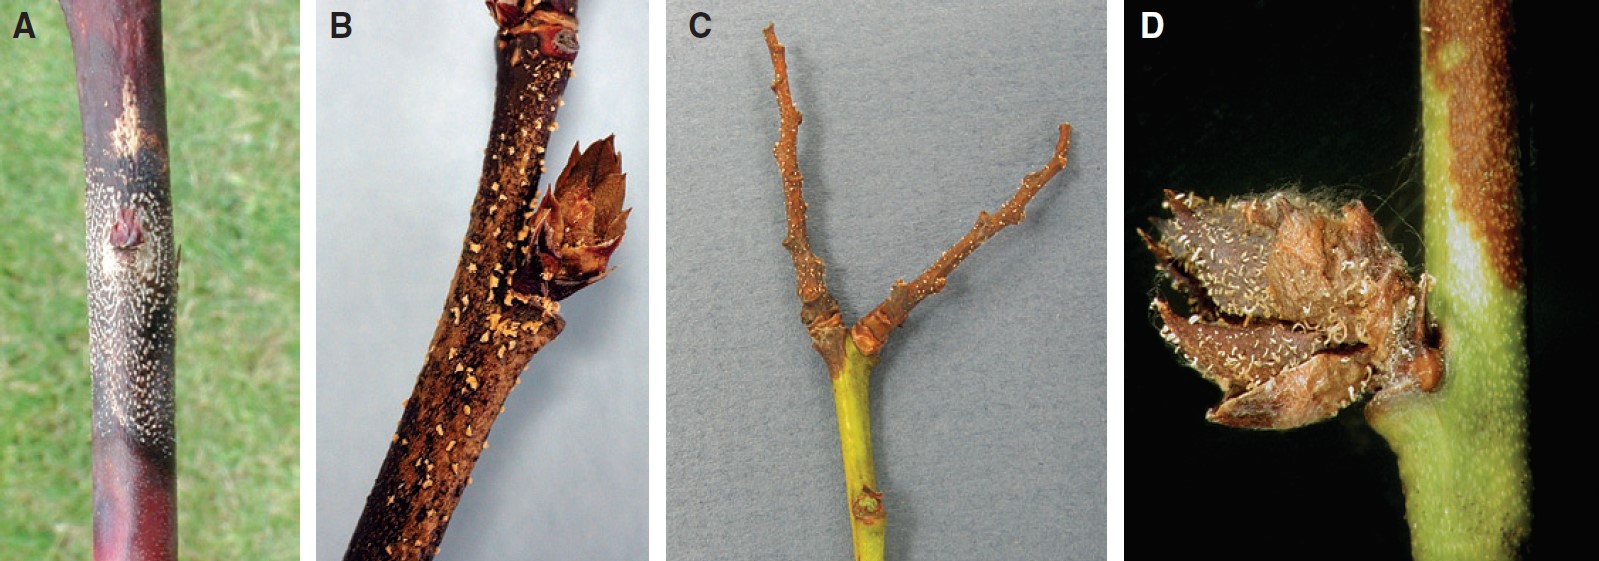 Blueberry stems infected with anthracnose.